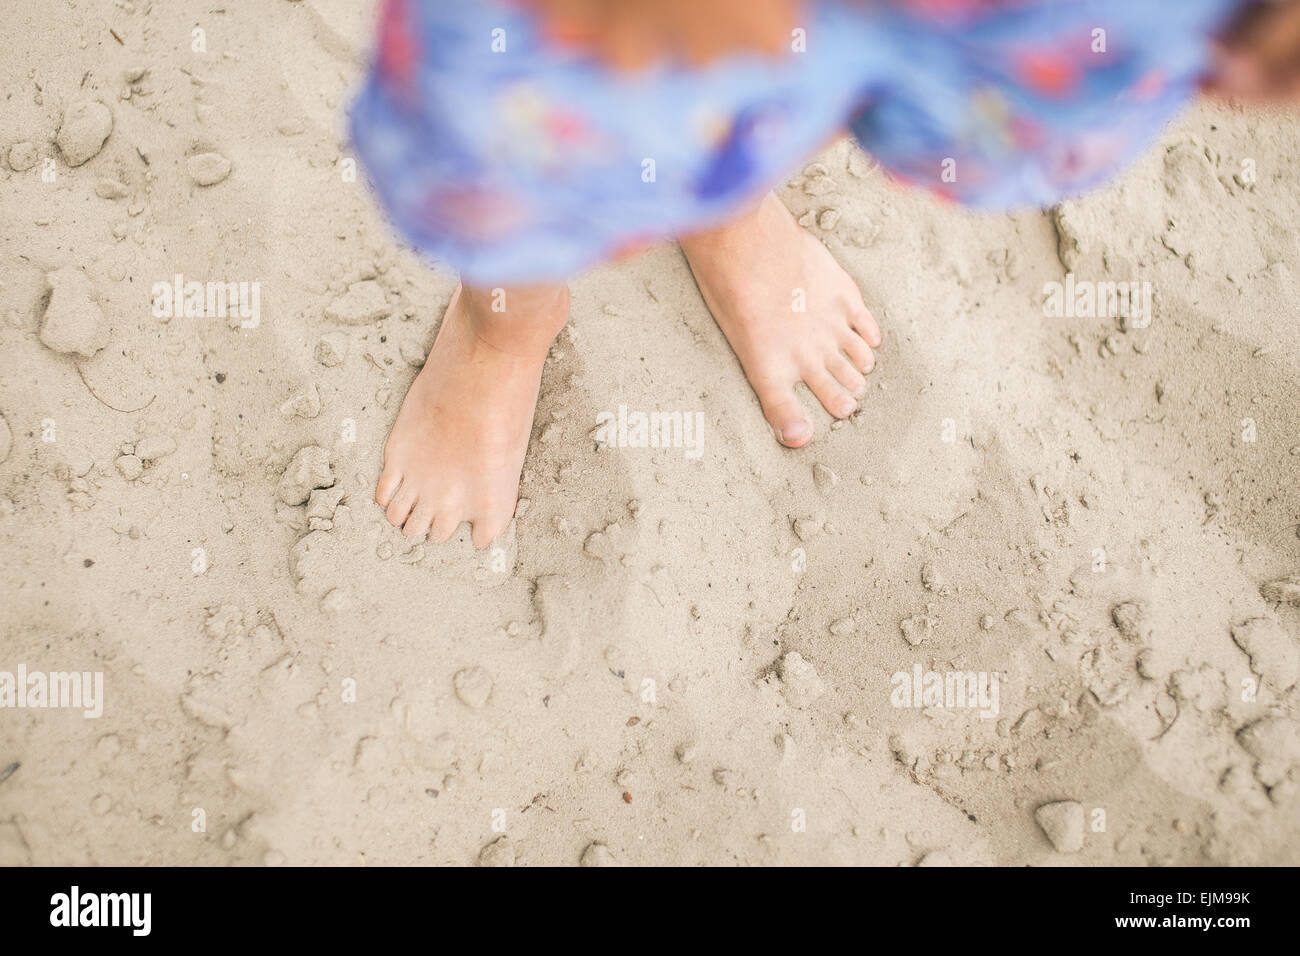 Toddler feet on sand at the beach. Child in blue shorts walking barefoot. Having fun at summertime. Stock Photo